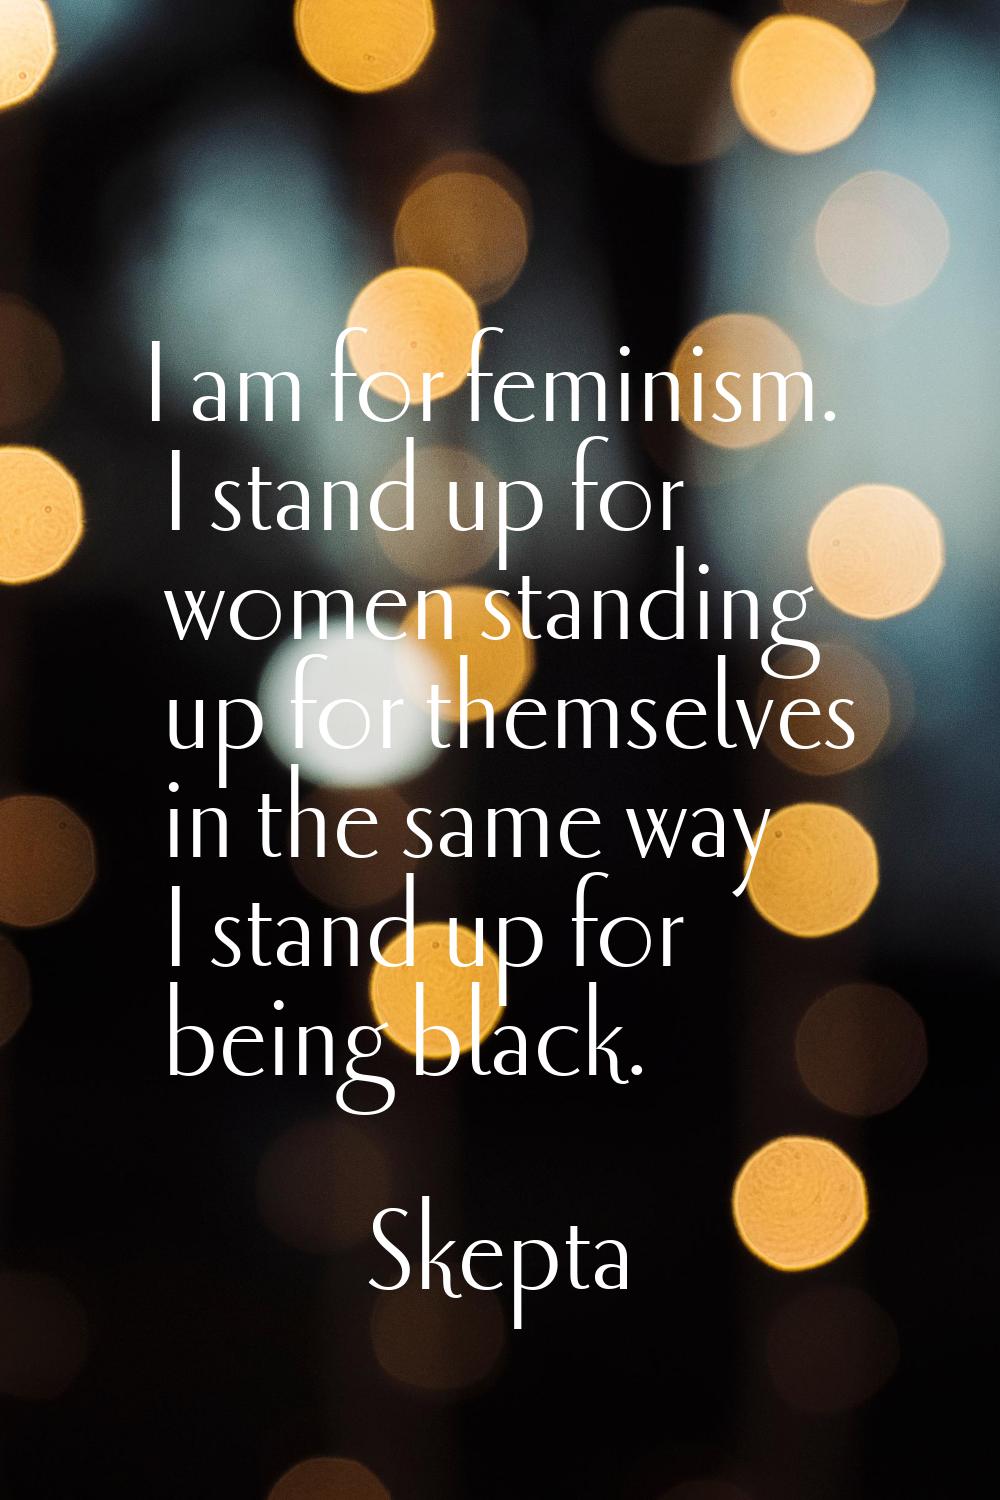 I am for feminism. I stand up for women standing up for themselves in the same way I stand up for b